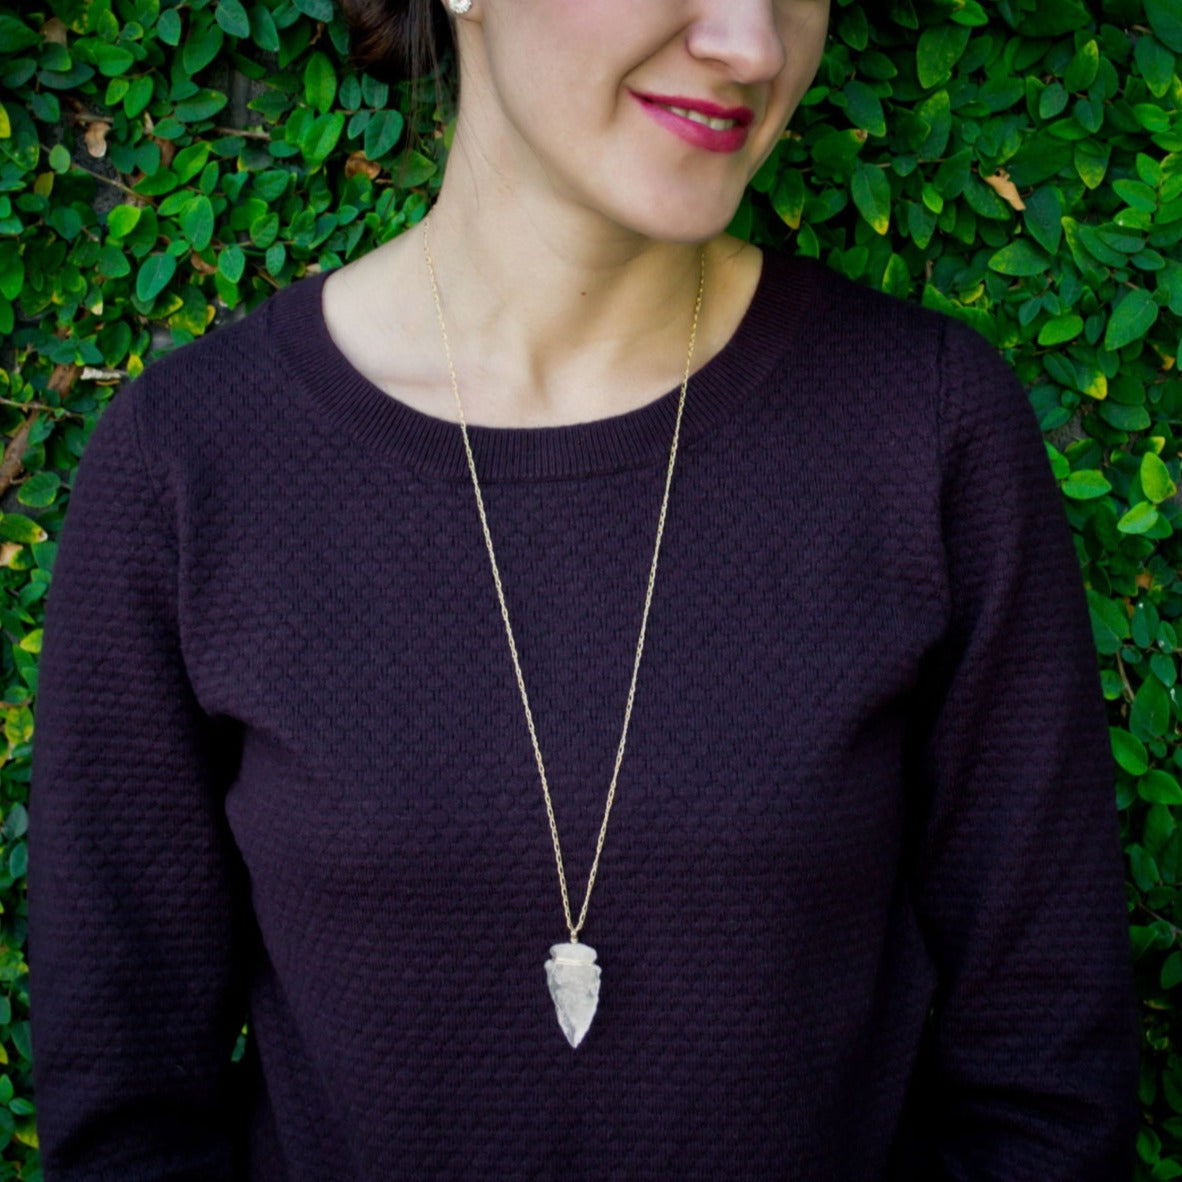 Elevate your style with the Althea Quartz Crystal Necklace, featuring a hand-knapped natural quartz crystal arrowhead on a 14k gold-filled curb figaro chain. Image is necklace on model.